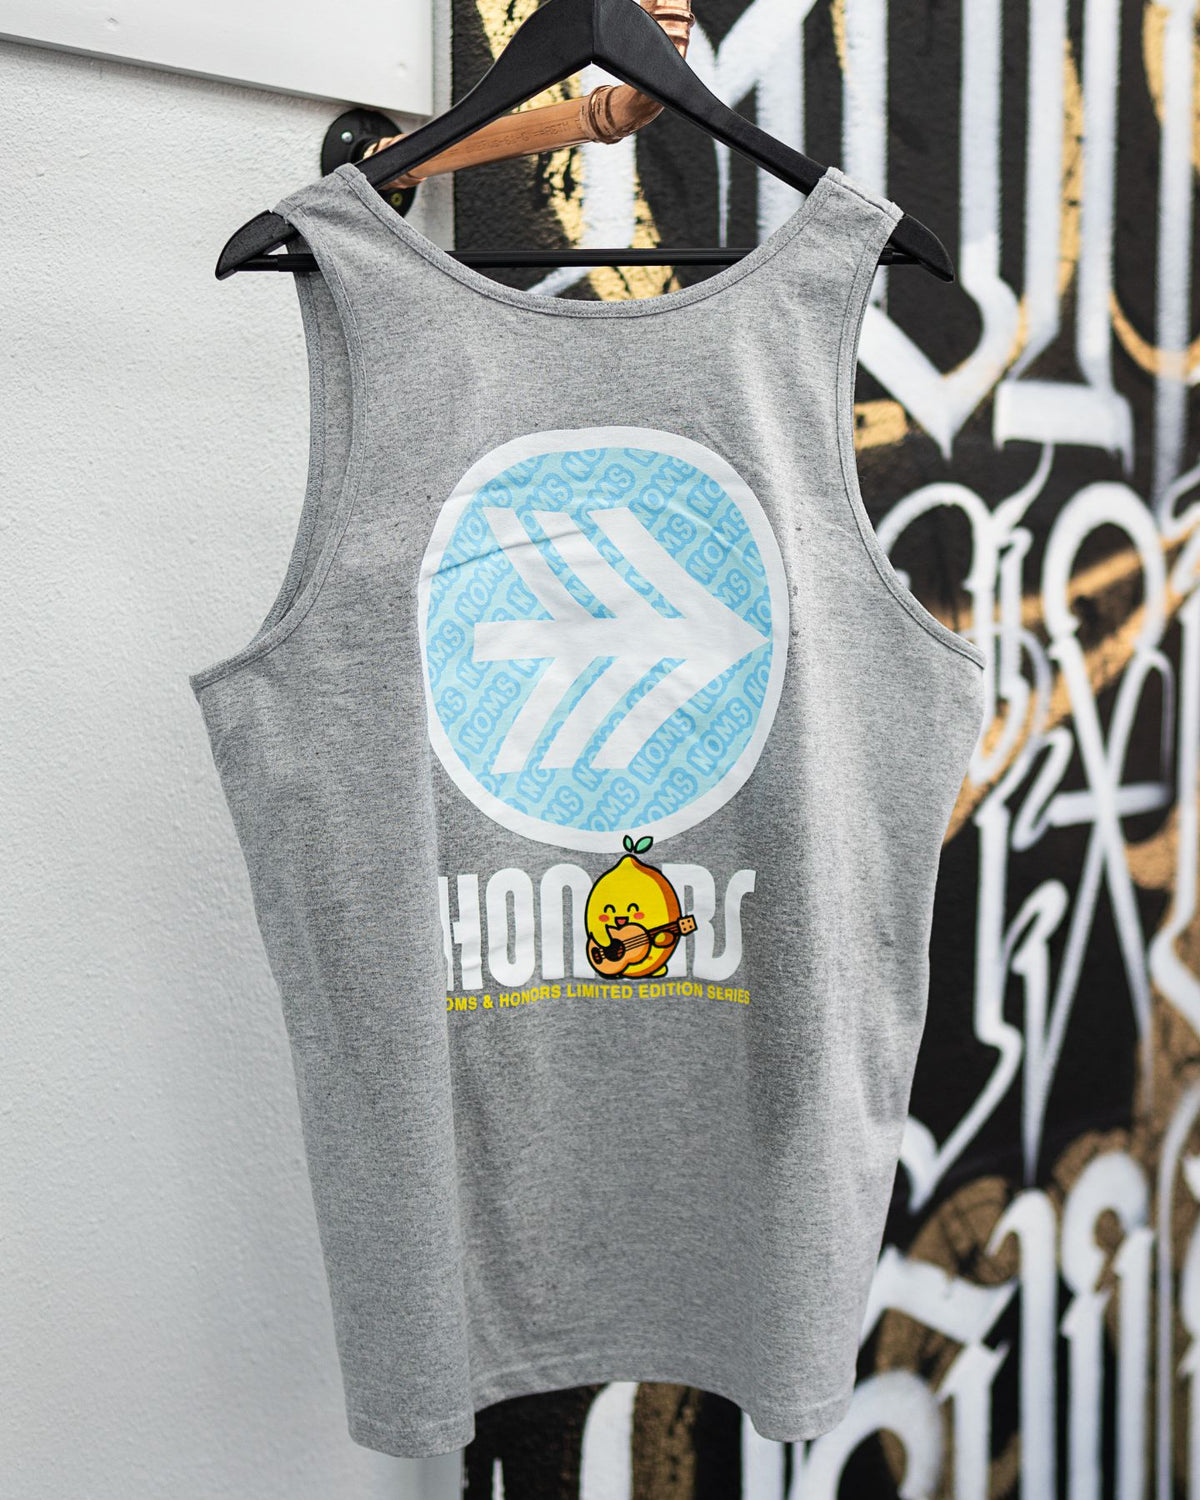 Honors x Noms Good Vibes Tank Top- Athletic Grey